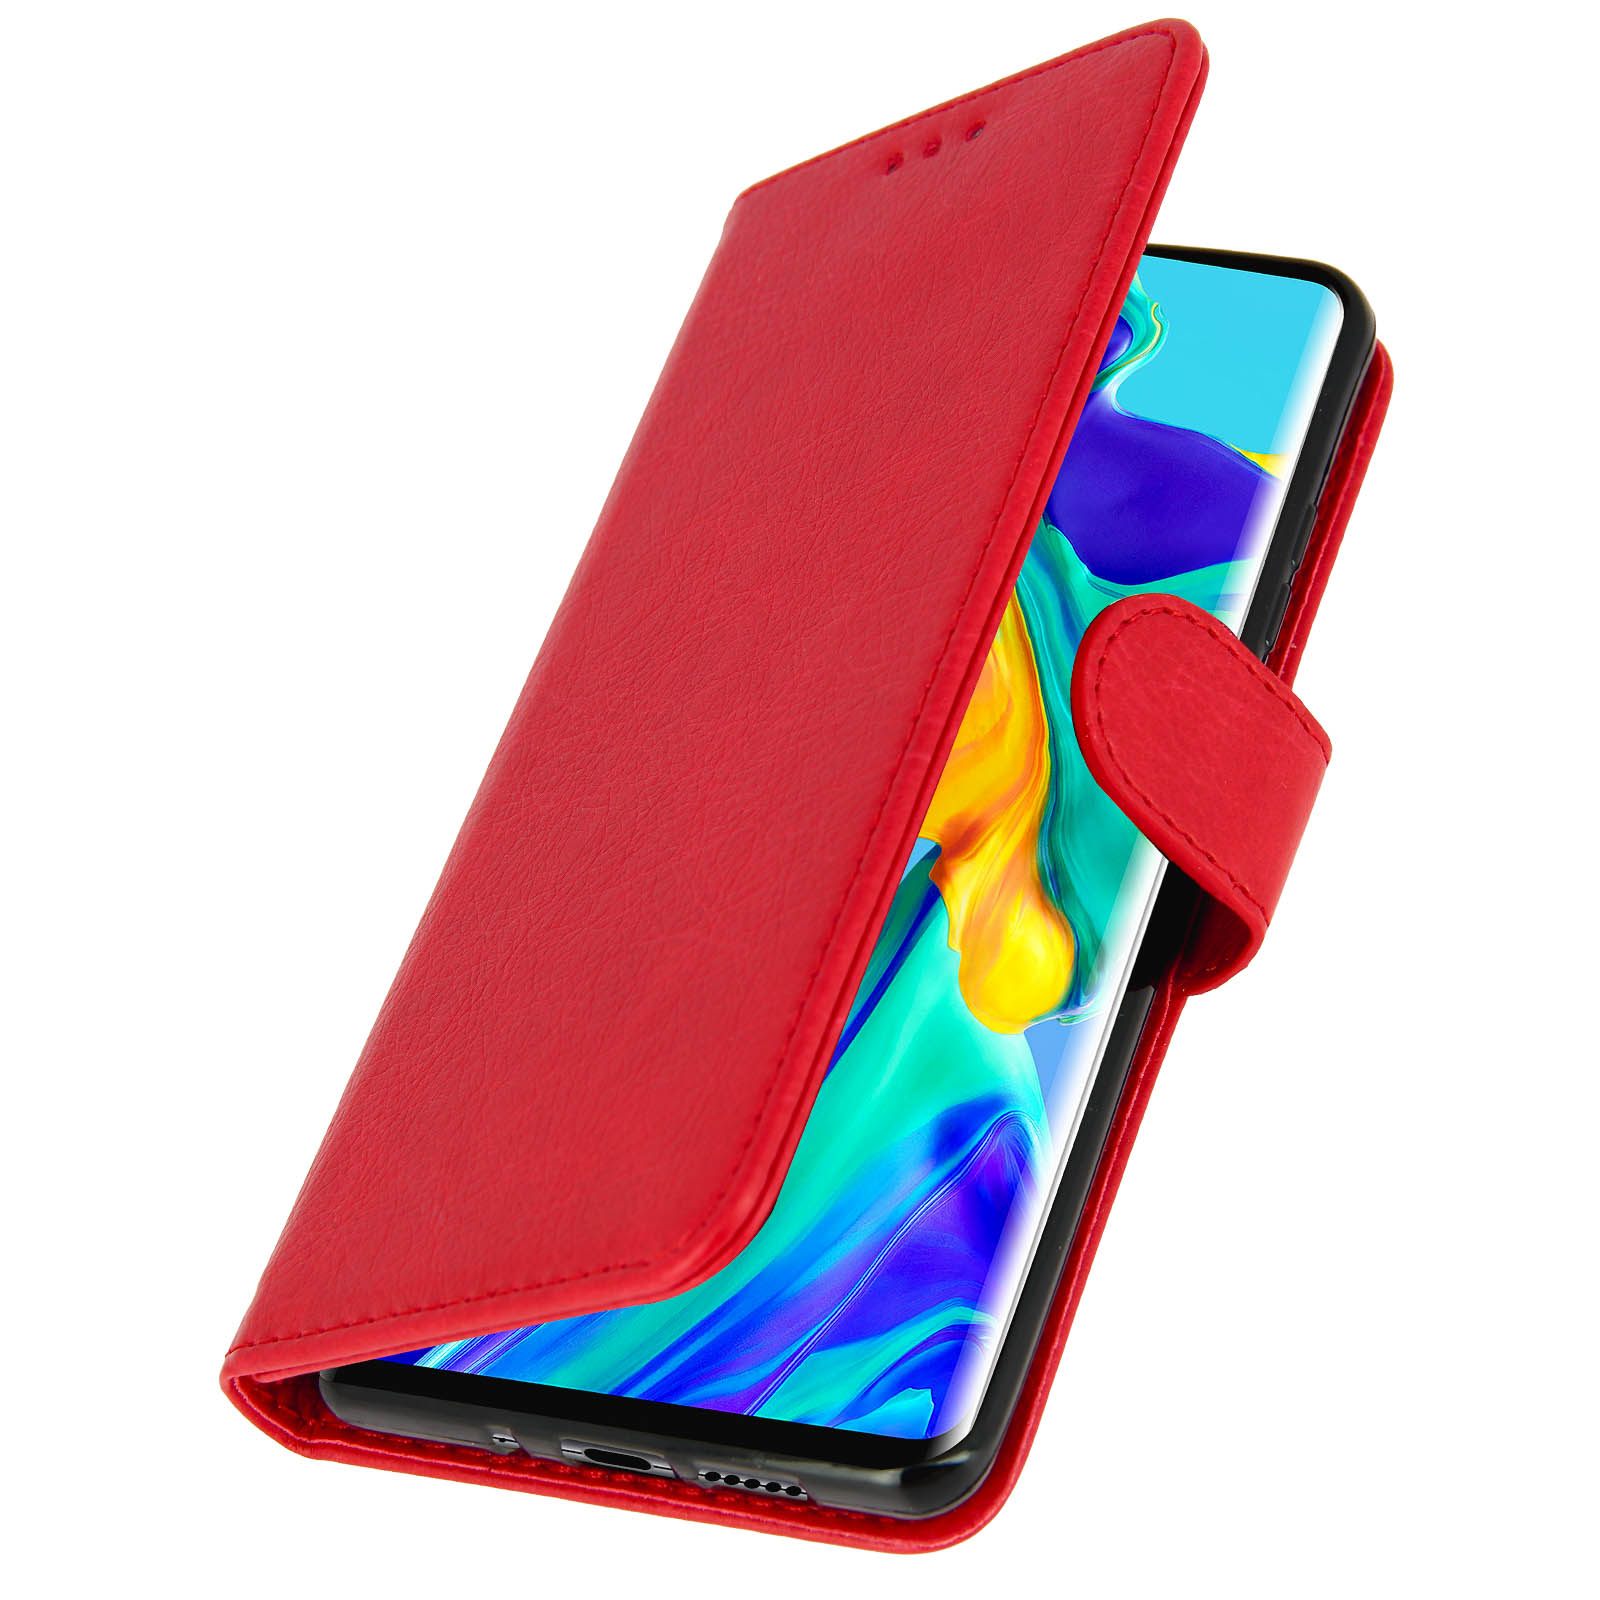 AVIZAR Chester Series, Bookcover, Huawei, Rot P30 Pro